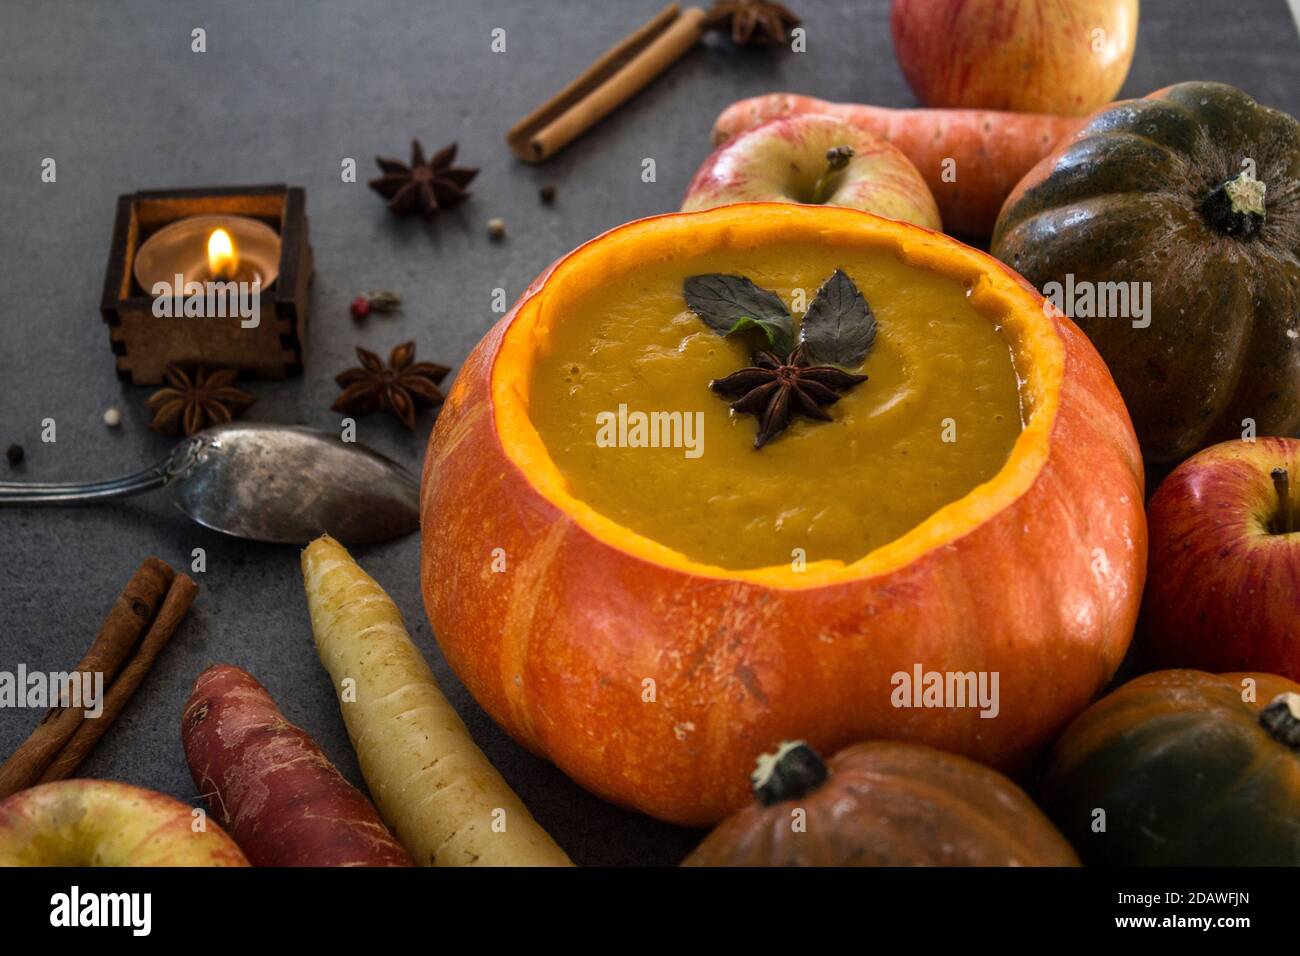 Squash soup in pumpkin bowl. Top view photo of pumpkin, apples, carrots anise stars and cinnamon sticks. Grey background. Stock Photo